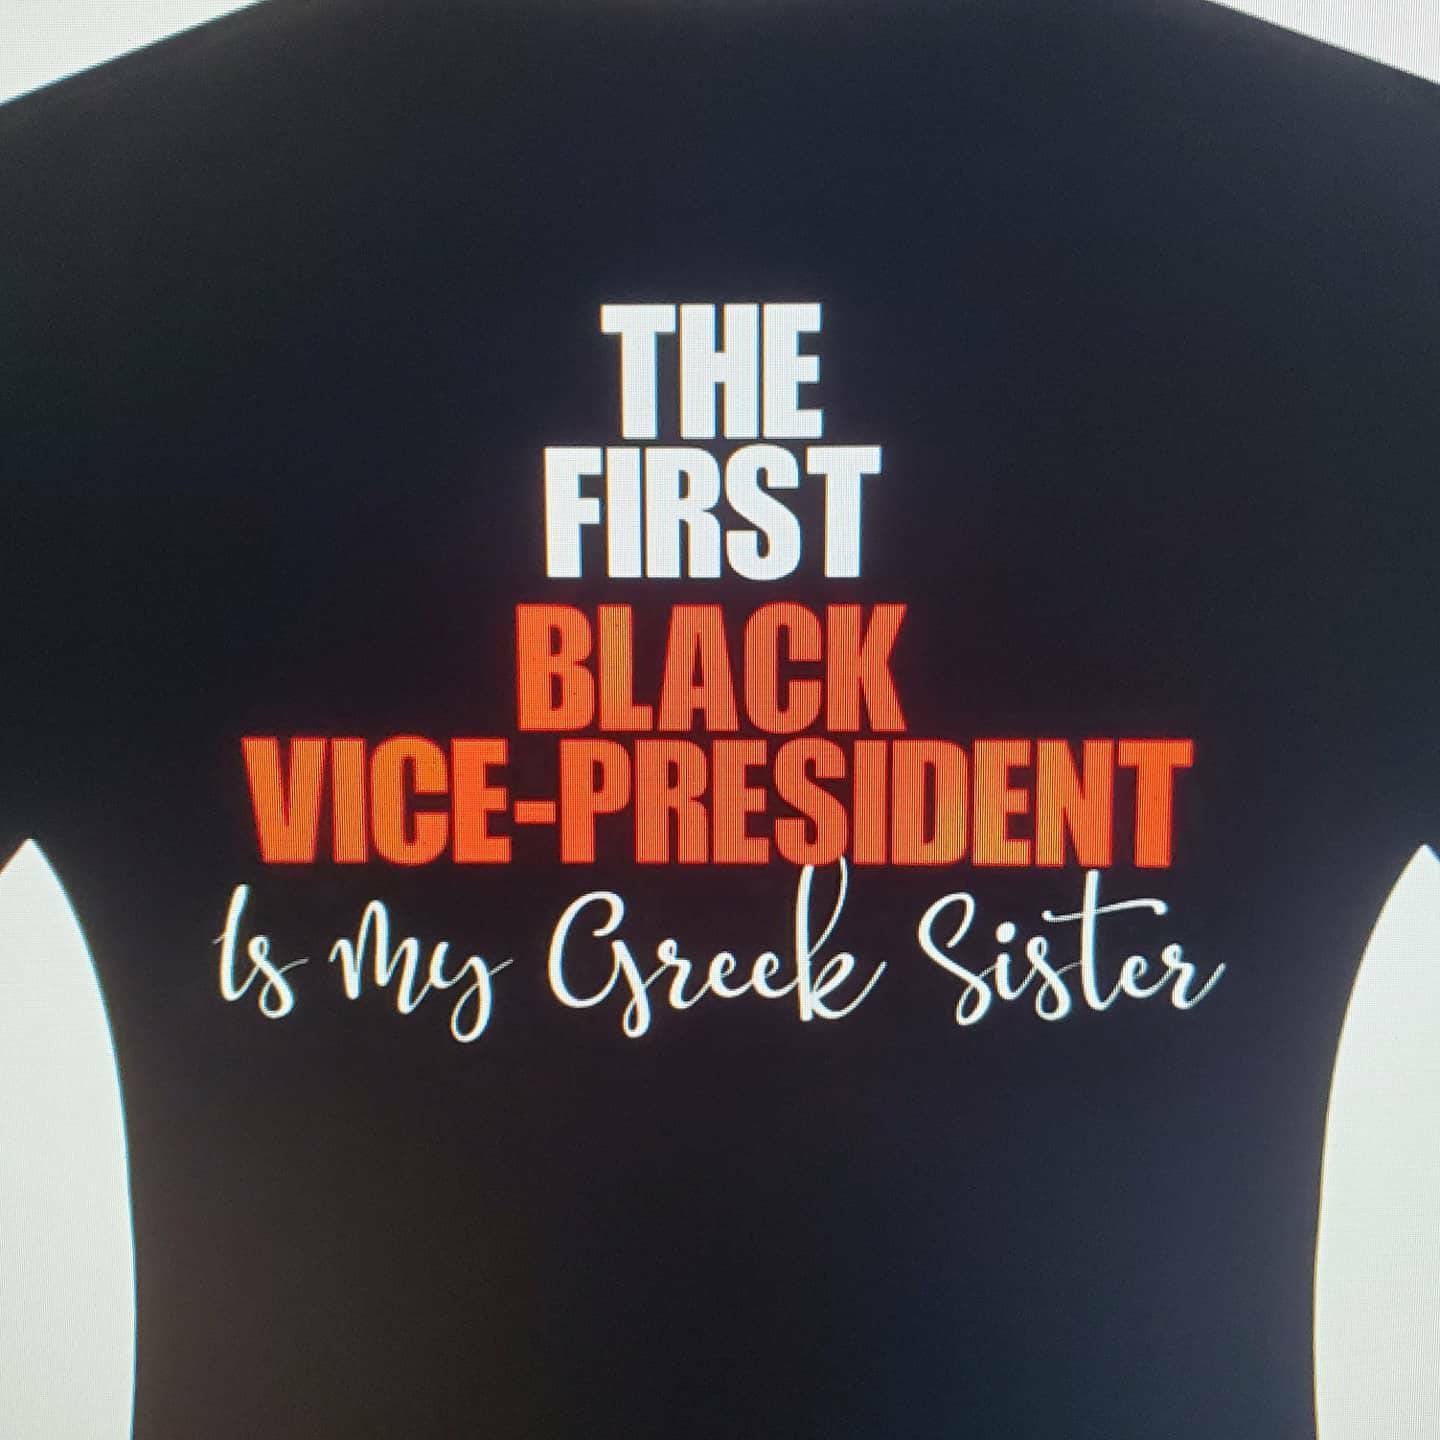 The first black vice president